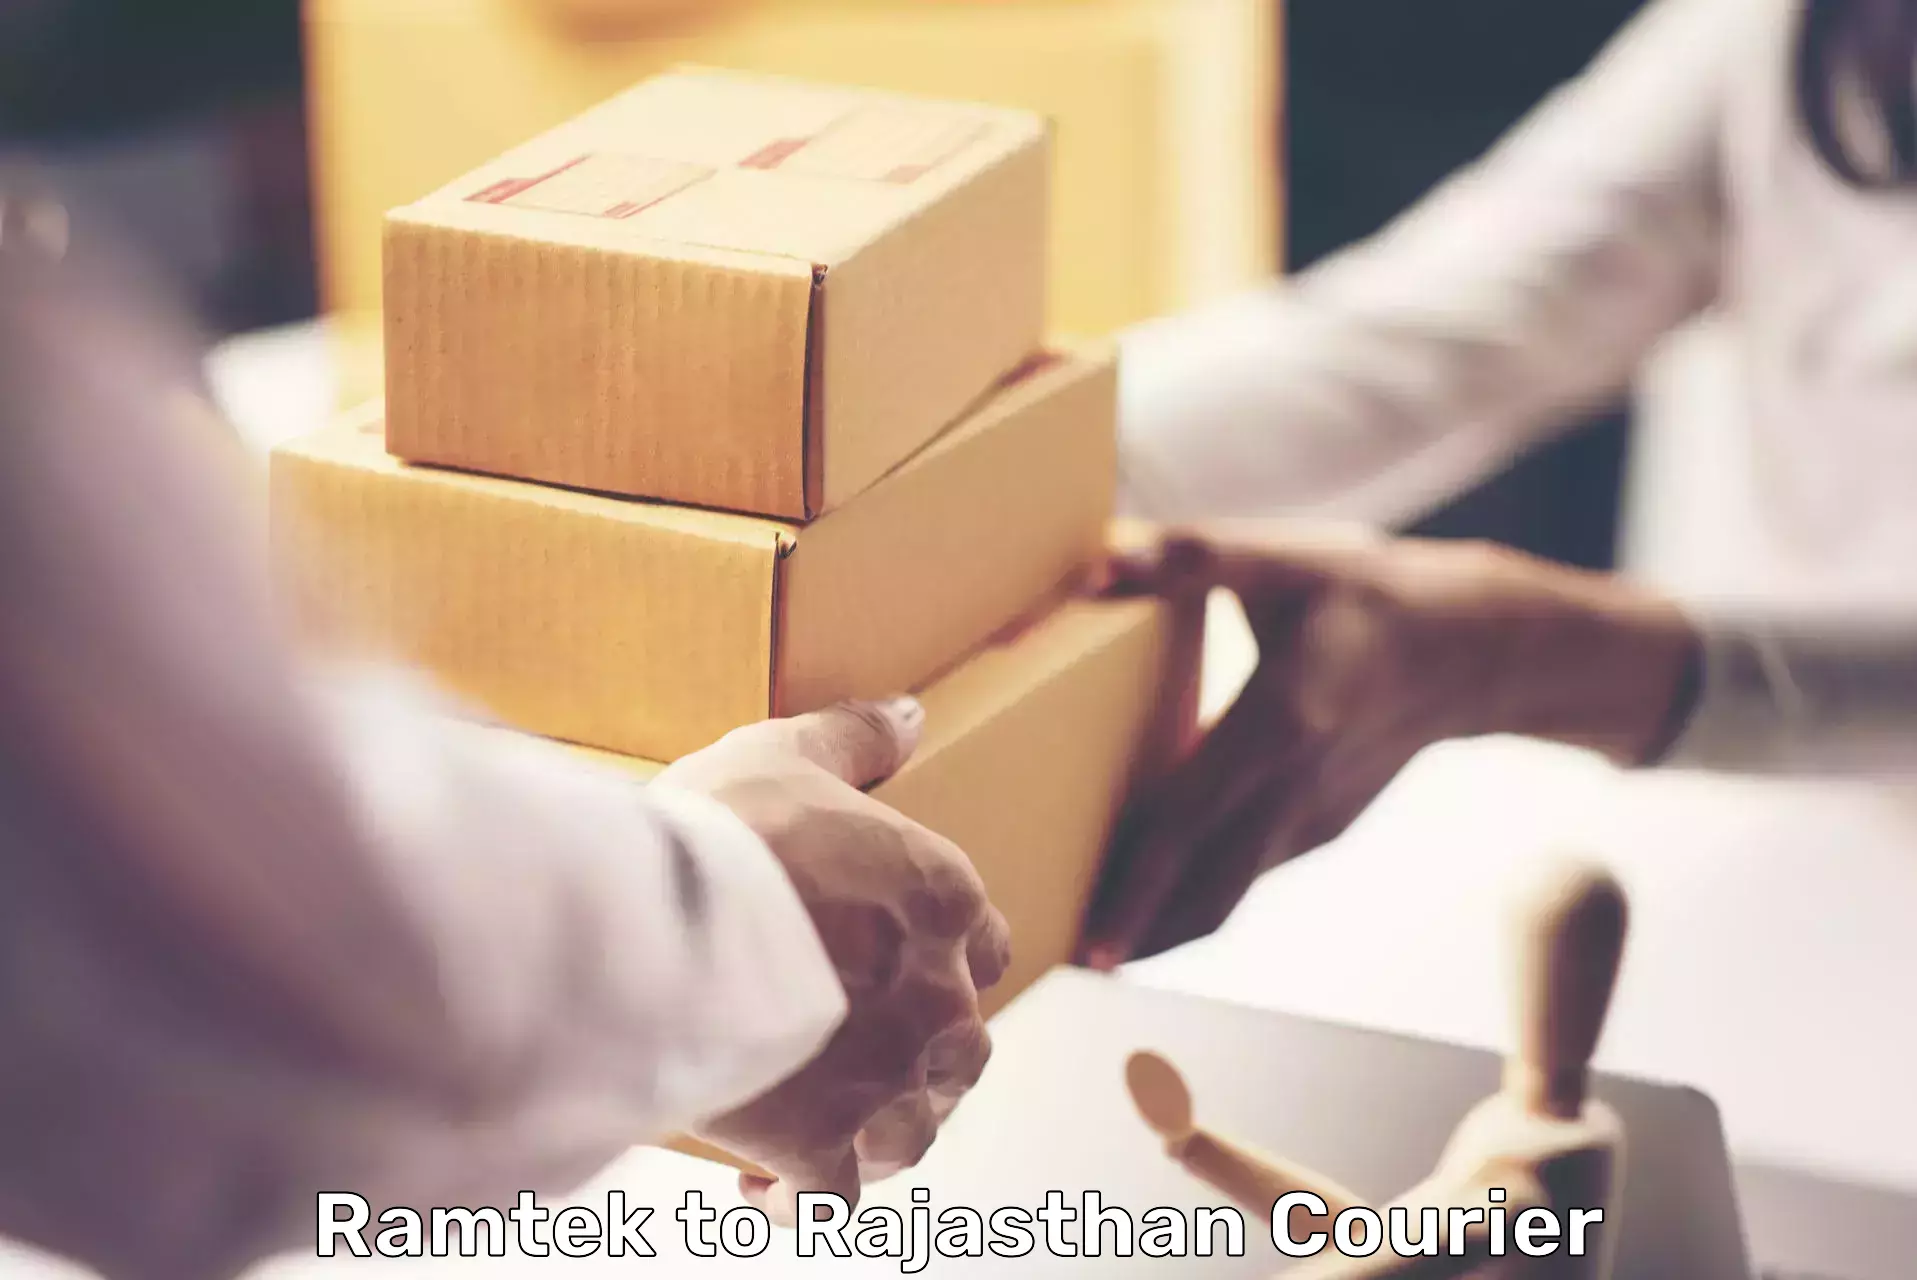 Delivery service partnership in Ramtek to Piparcity